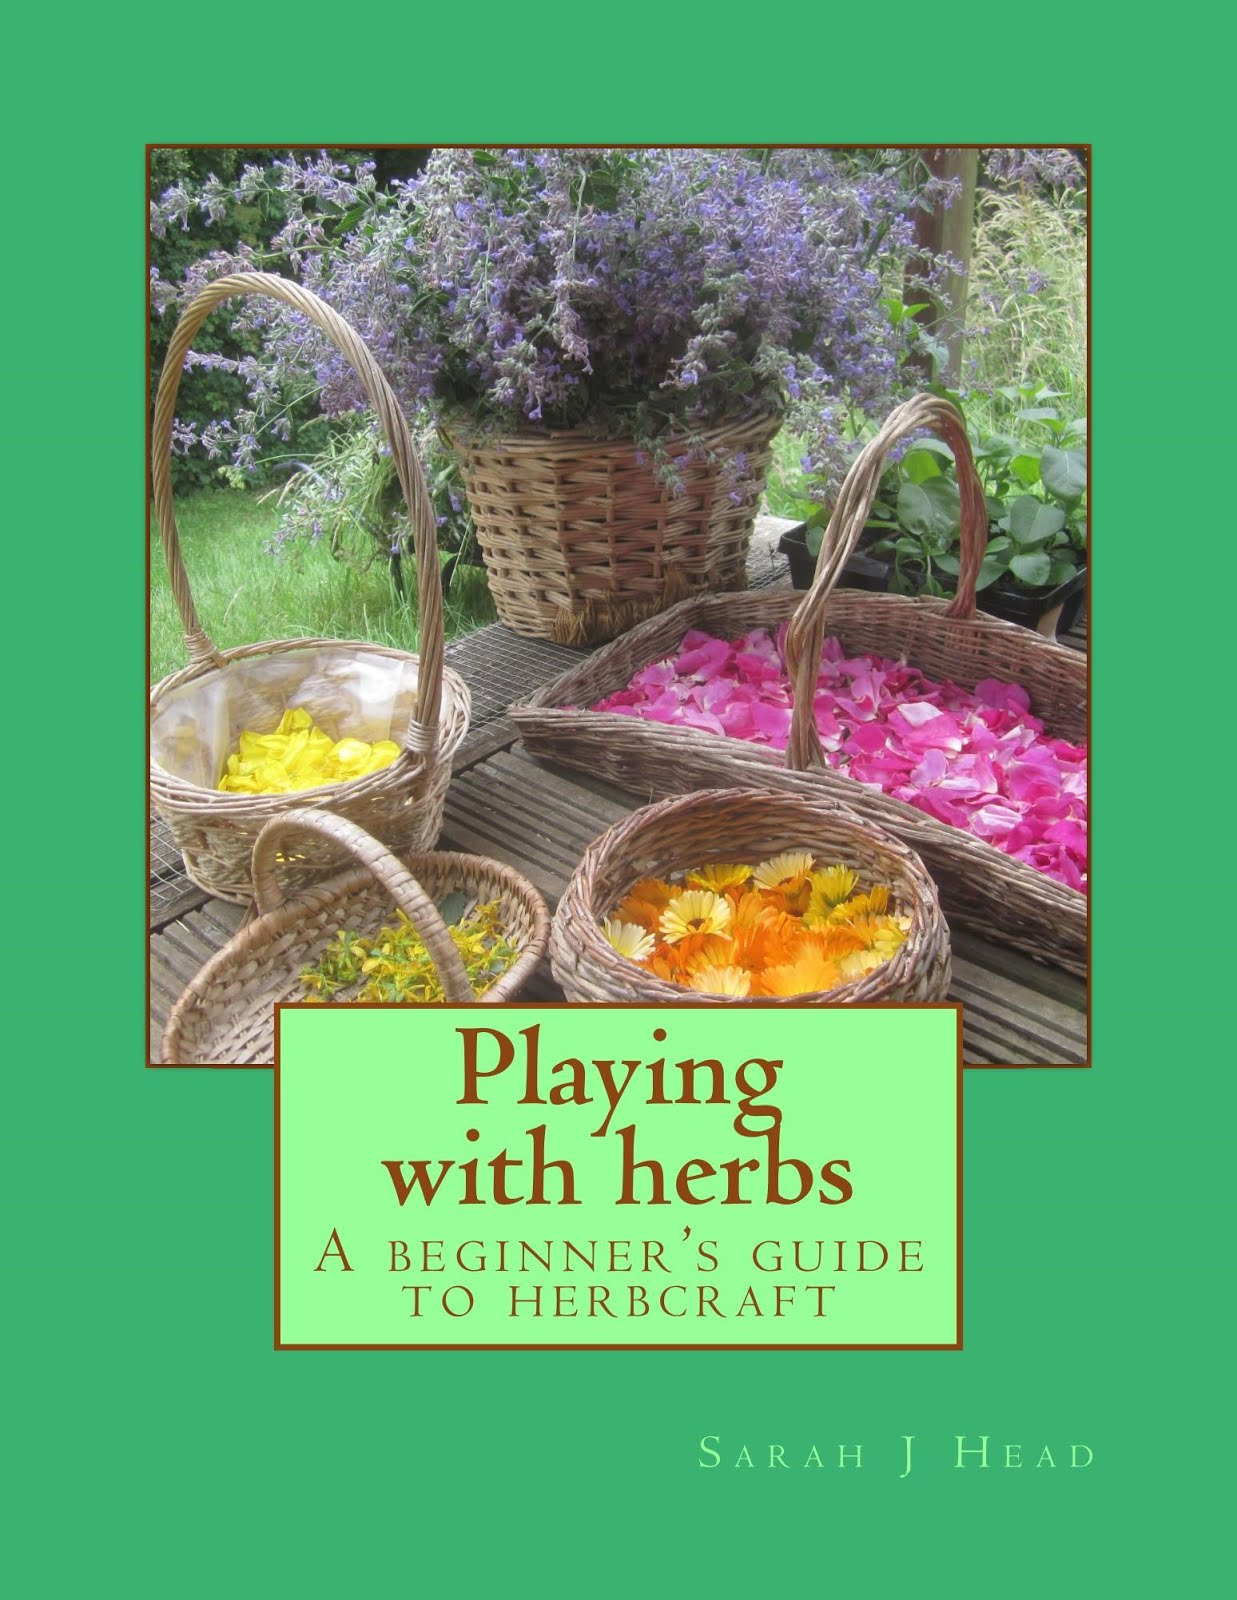 Playing with herbs